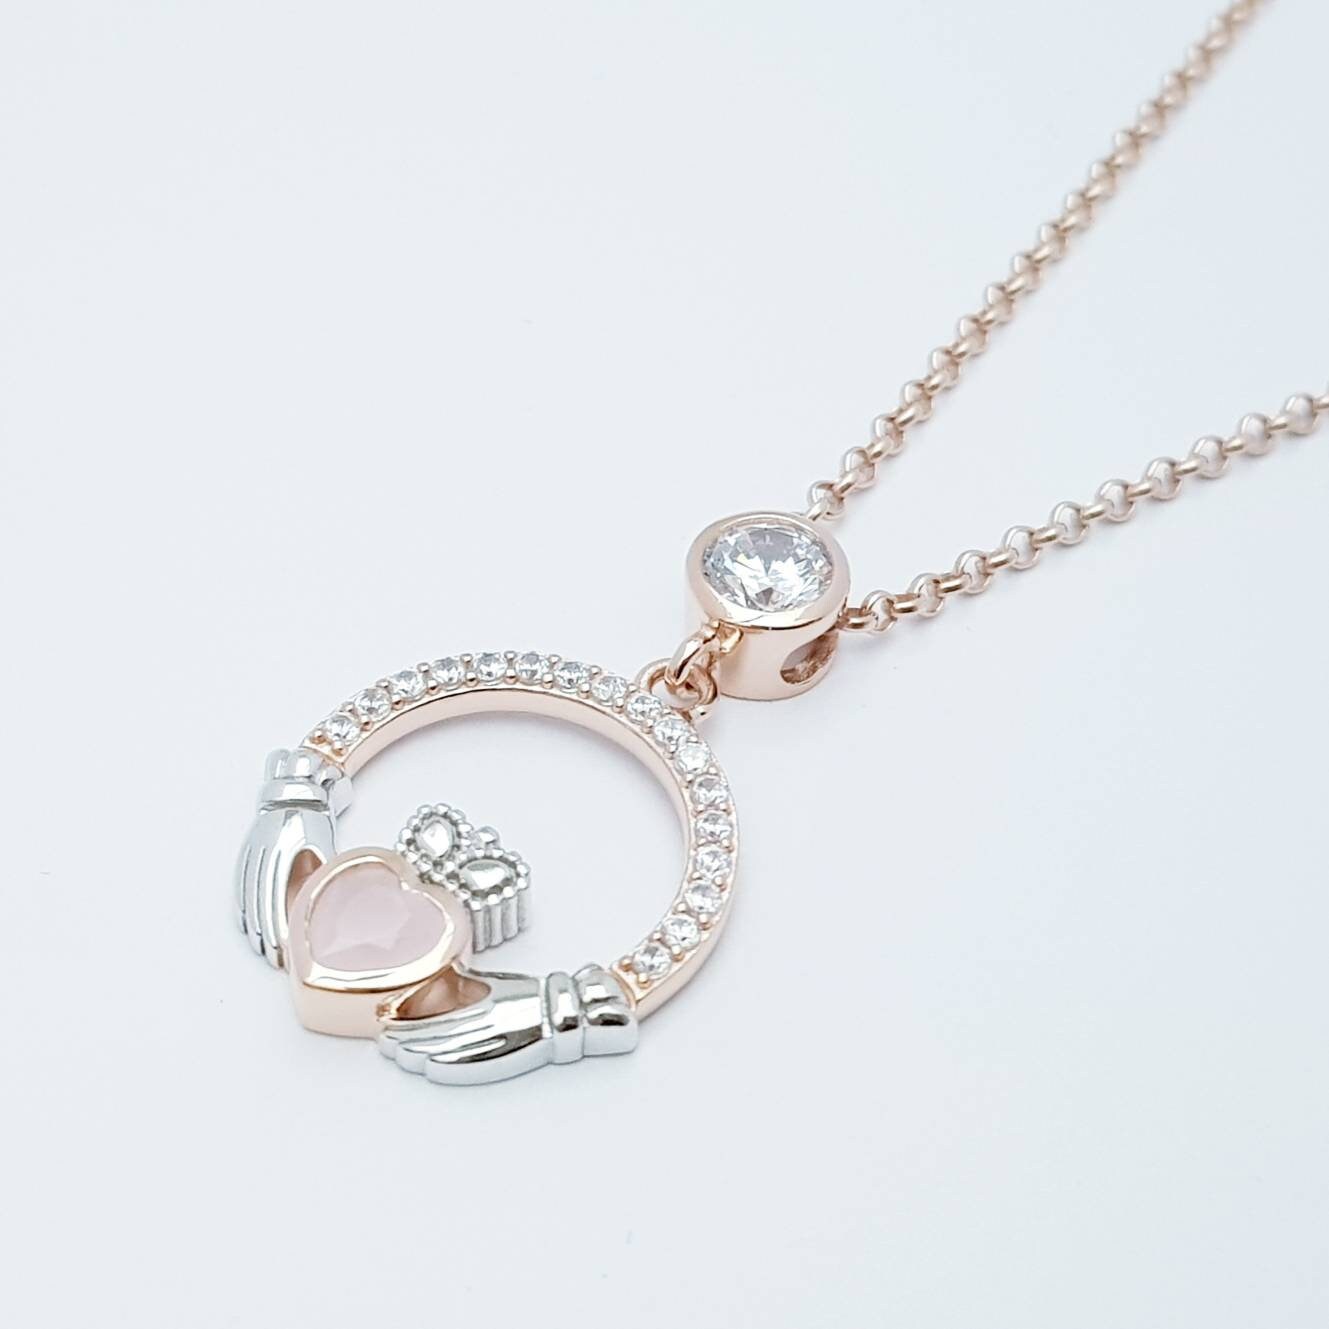 Baby pink Claddagh pendant, Irish claddagh necklace from Galway, Ireland, silver and rose gold claddagh pendant